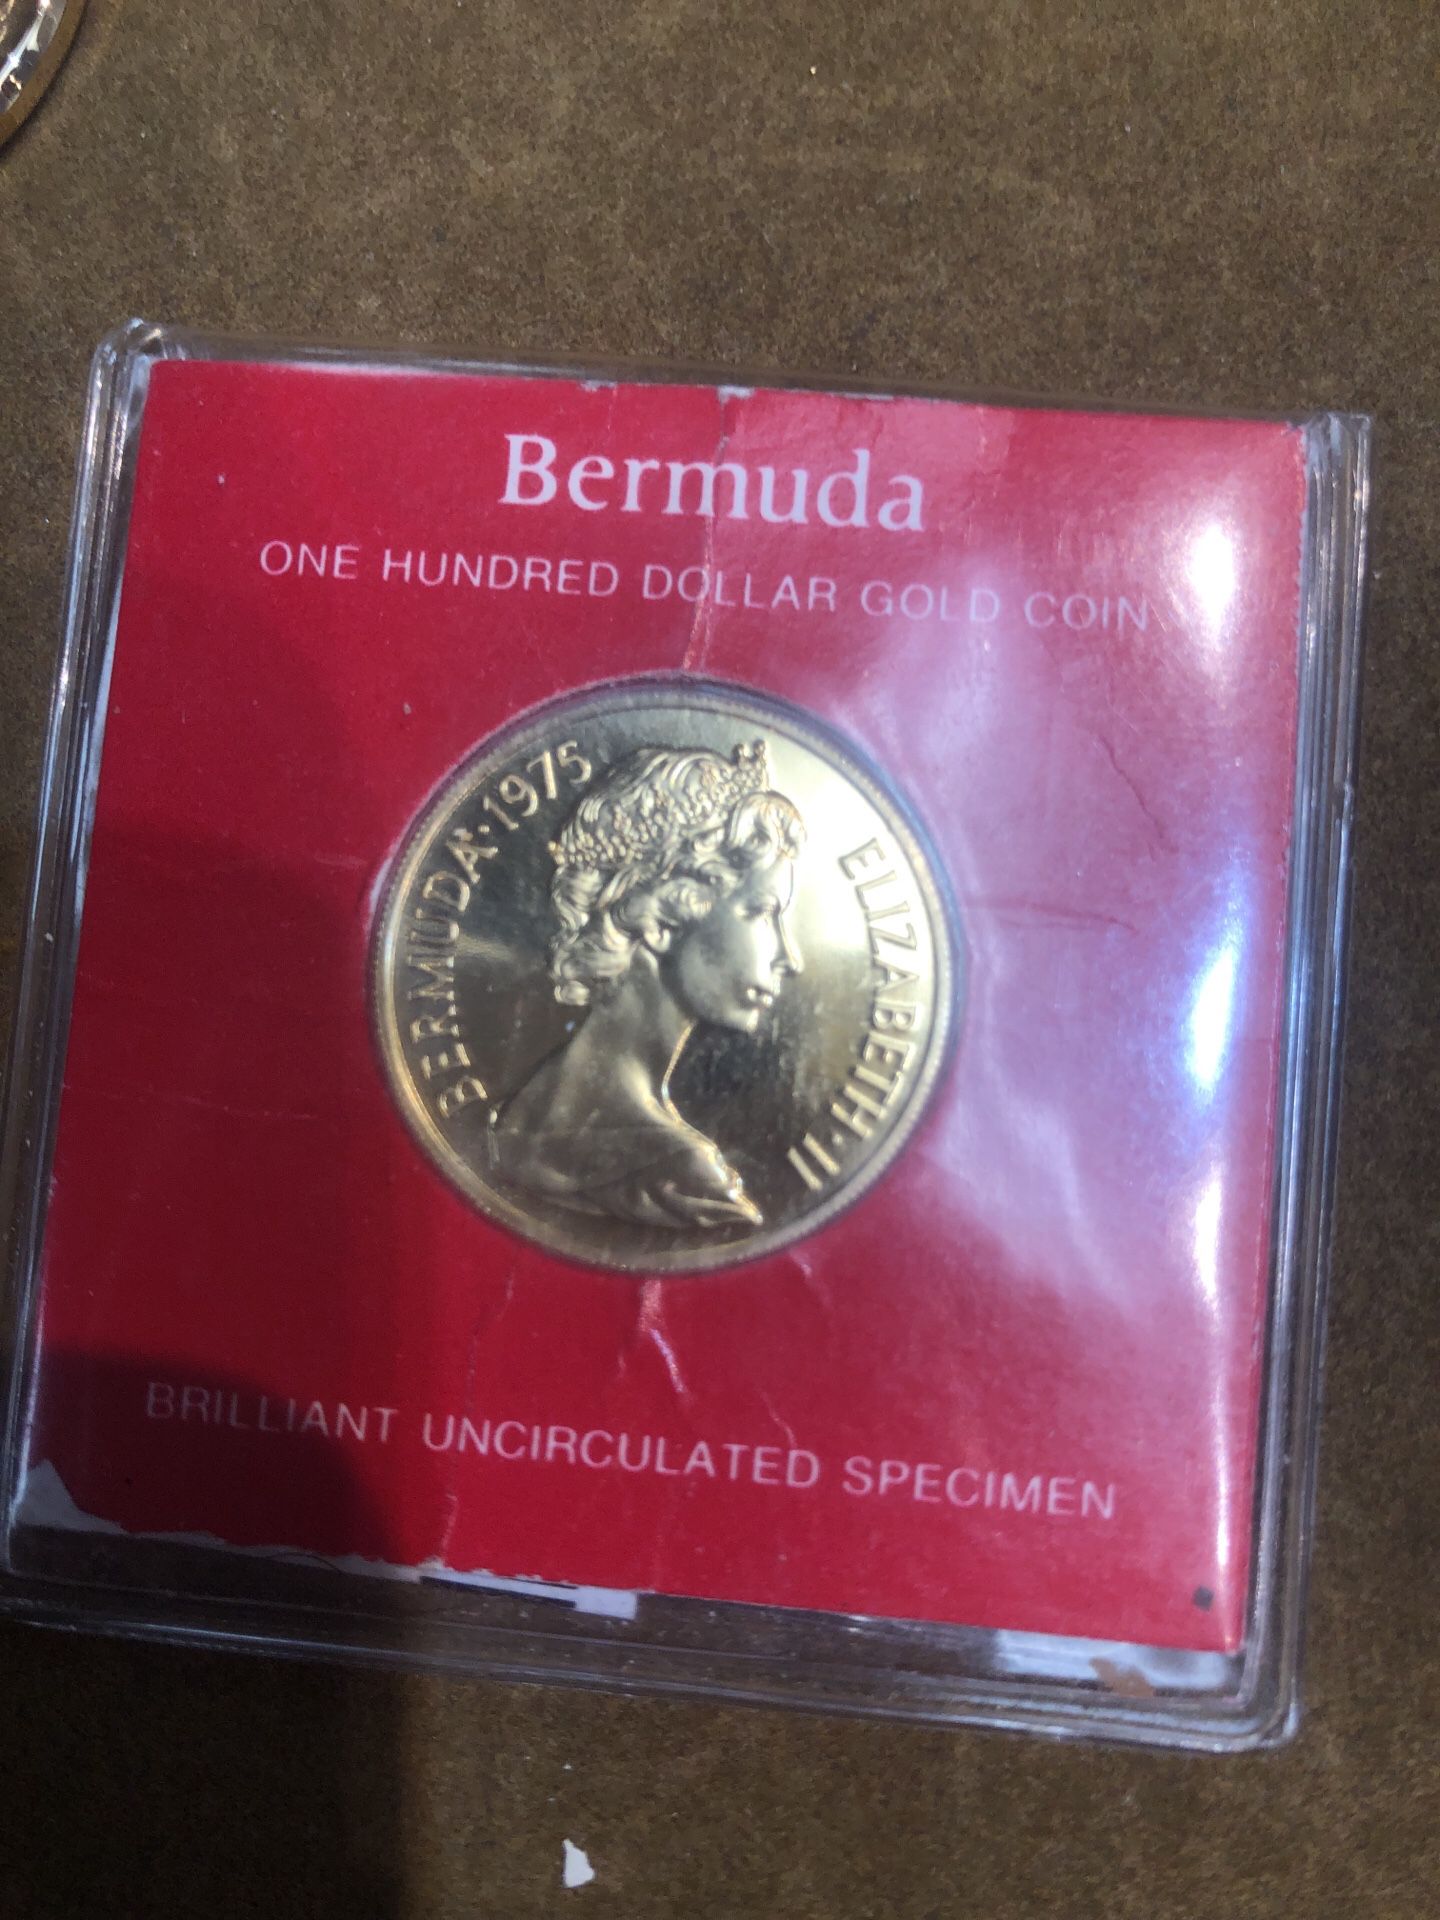 Gold Bermuda one hundred dollar coin. Uncirculated.